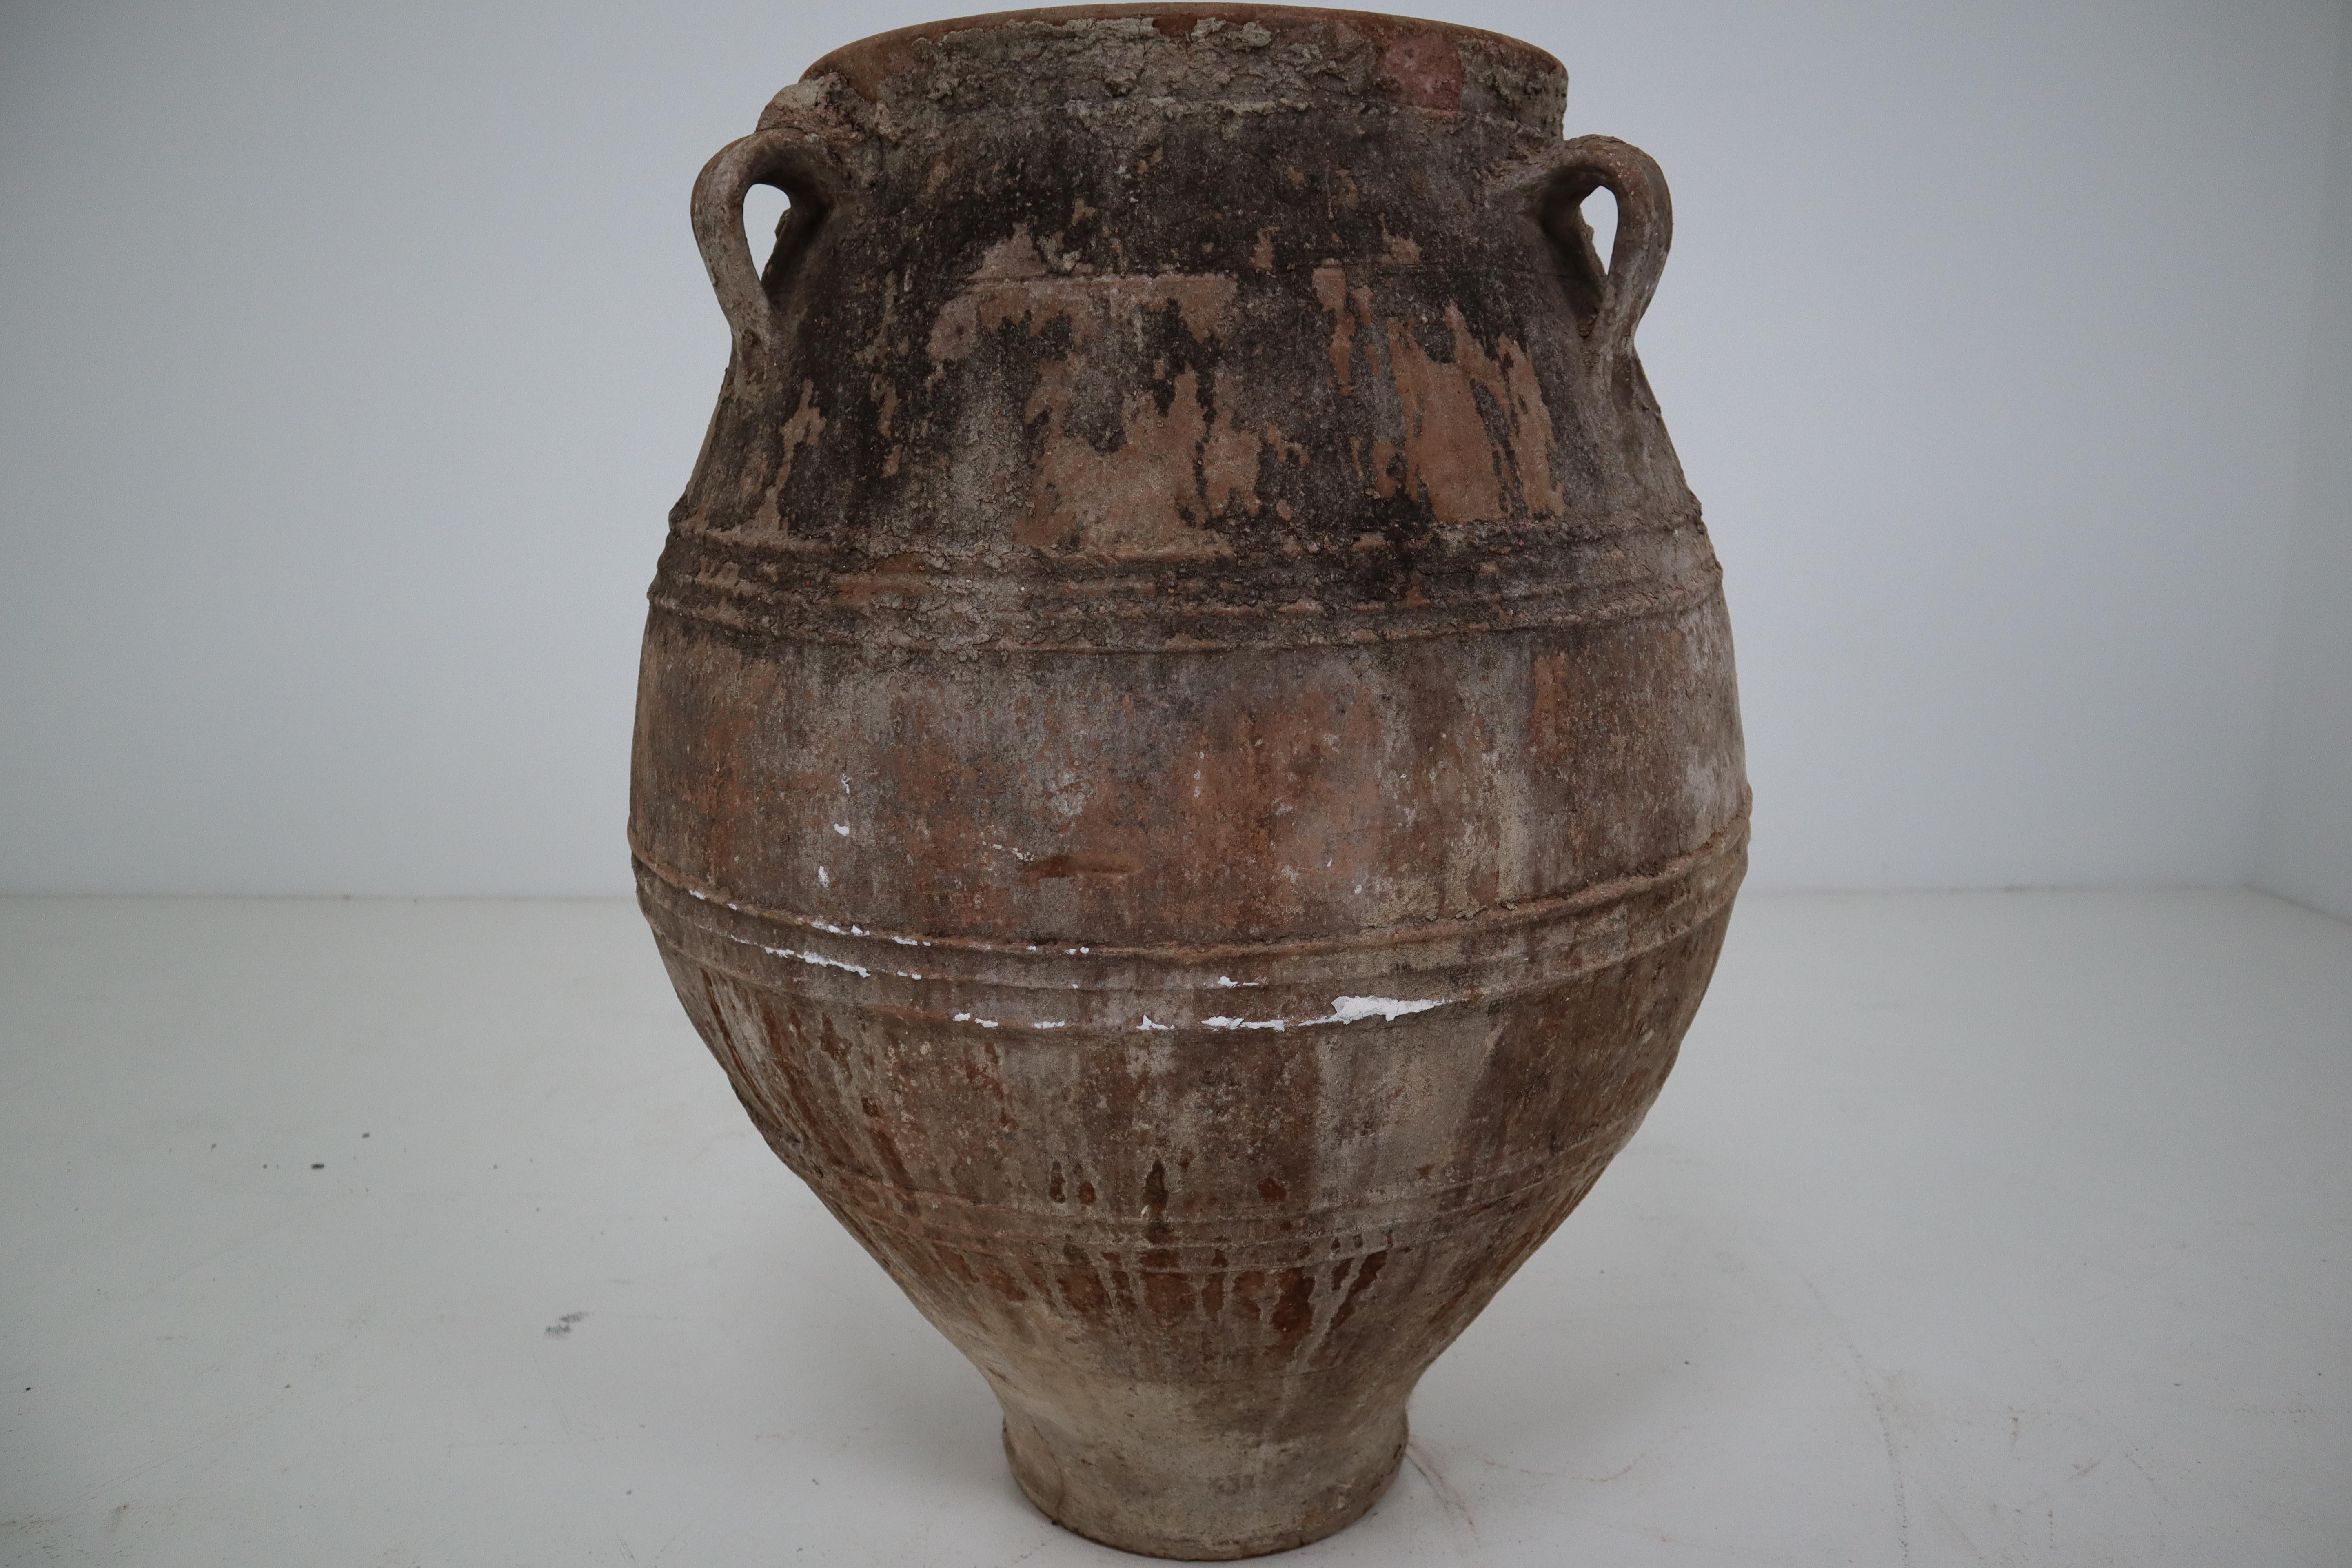 A large antique three-handled painted terracotta urn from the late 19th century Greece, with white finish and rounded belly. Picture this large 1880s urn in its former life, on a shaded terrace under an olive tree overlooking the Mediterranean Sea